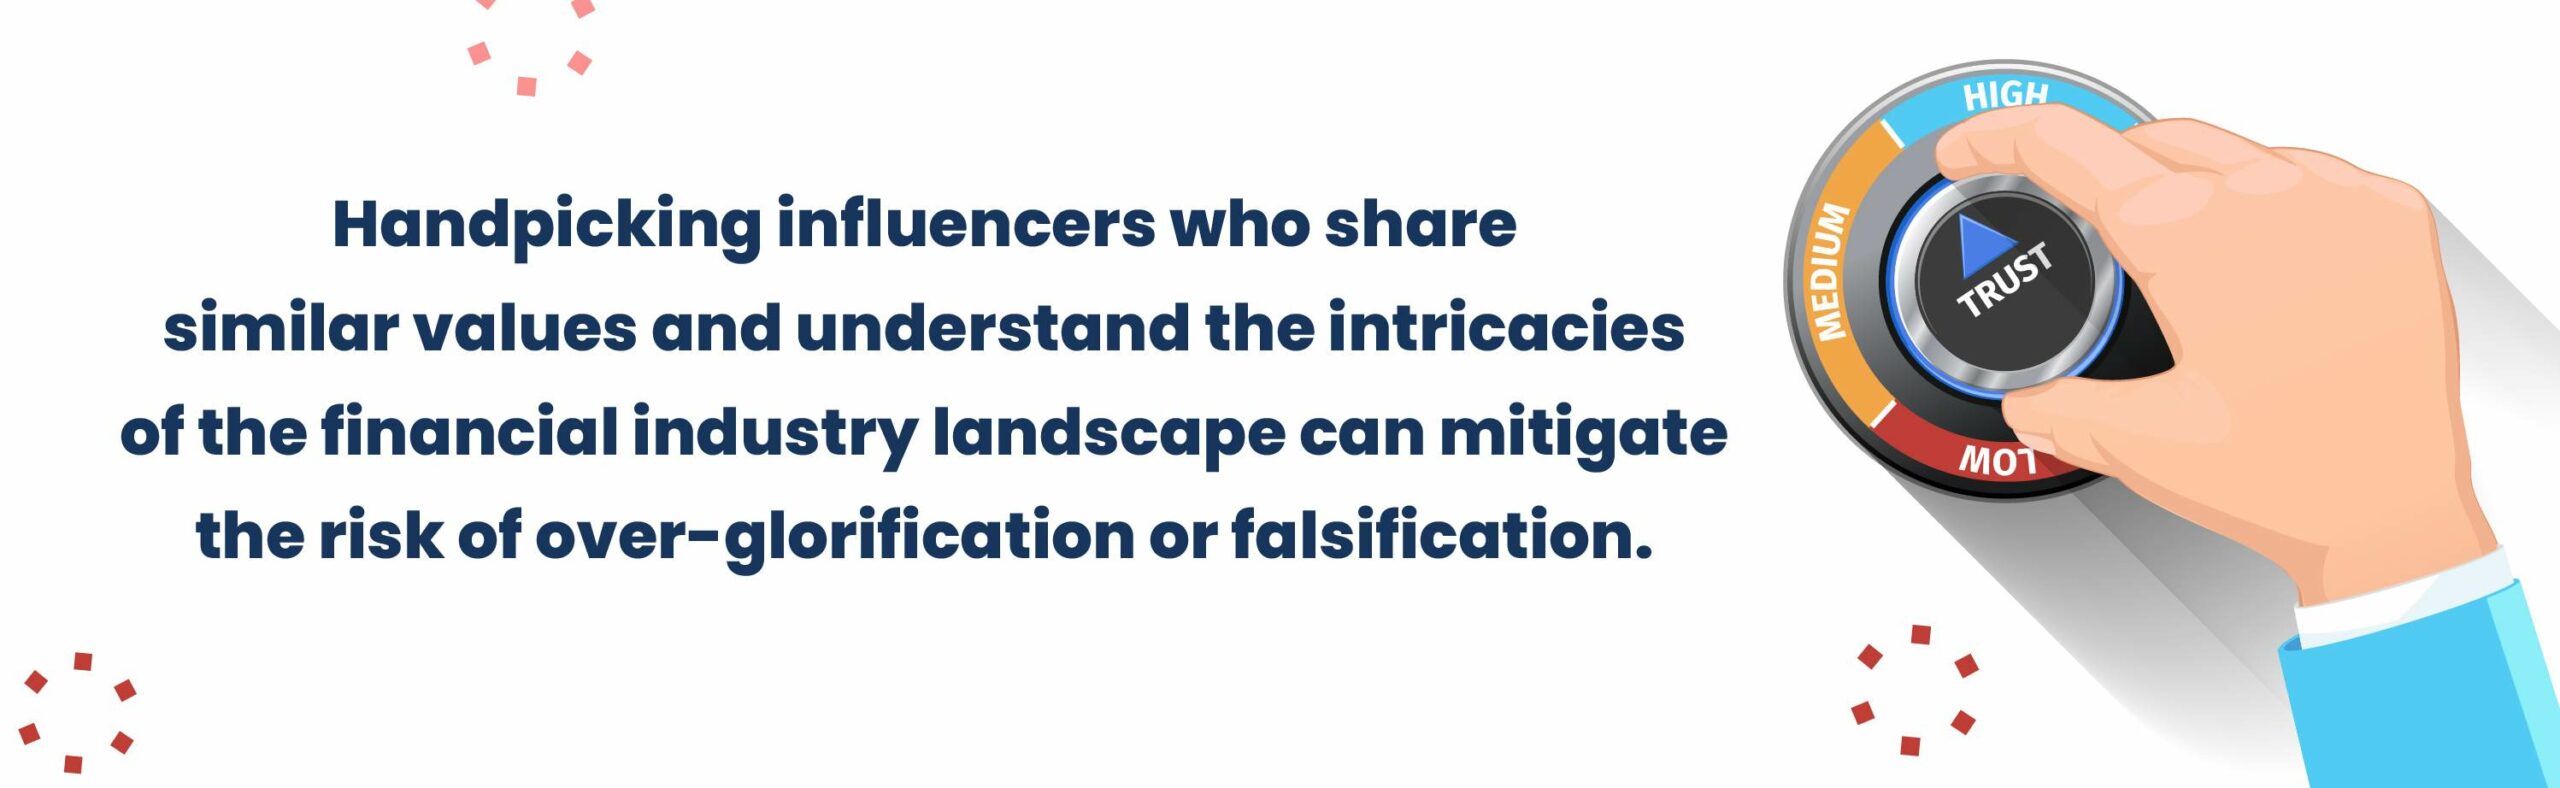 Handpicking influencers who share similar values and understand the intricacies of the financial industry landscape can mitigate the risk of over-glorification or falsification.